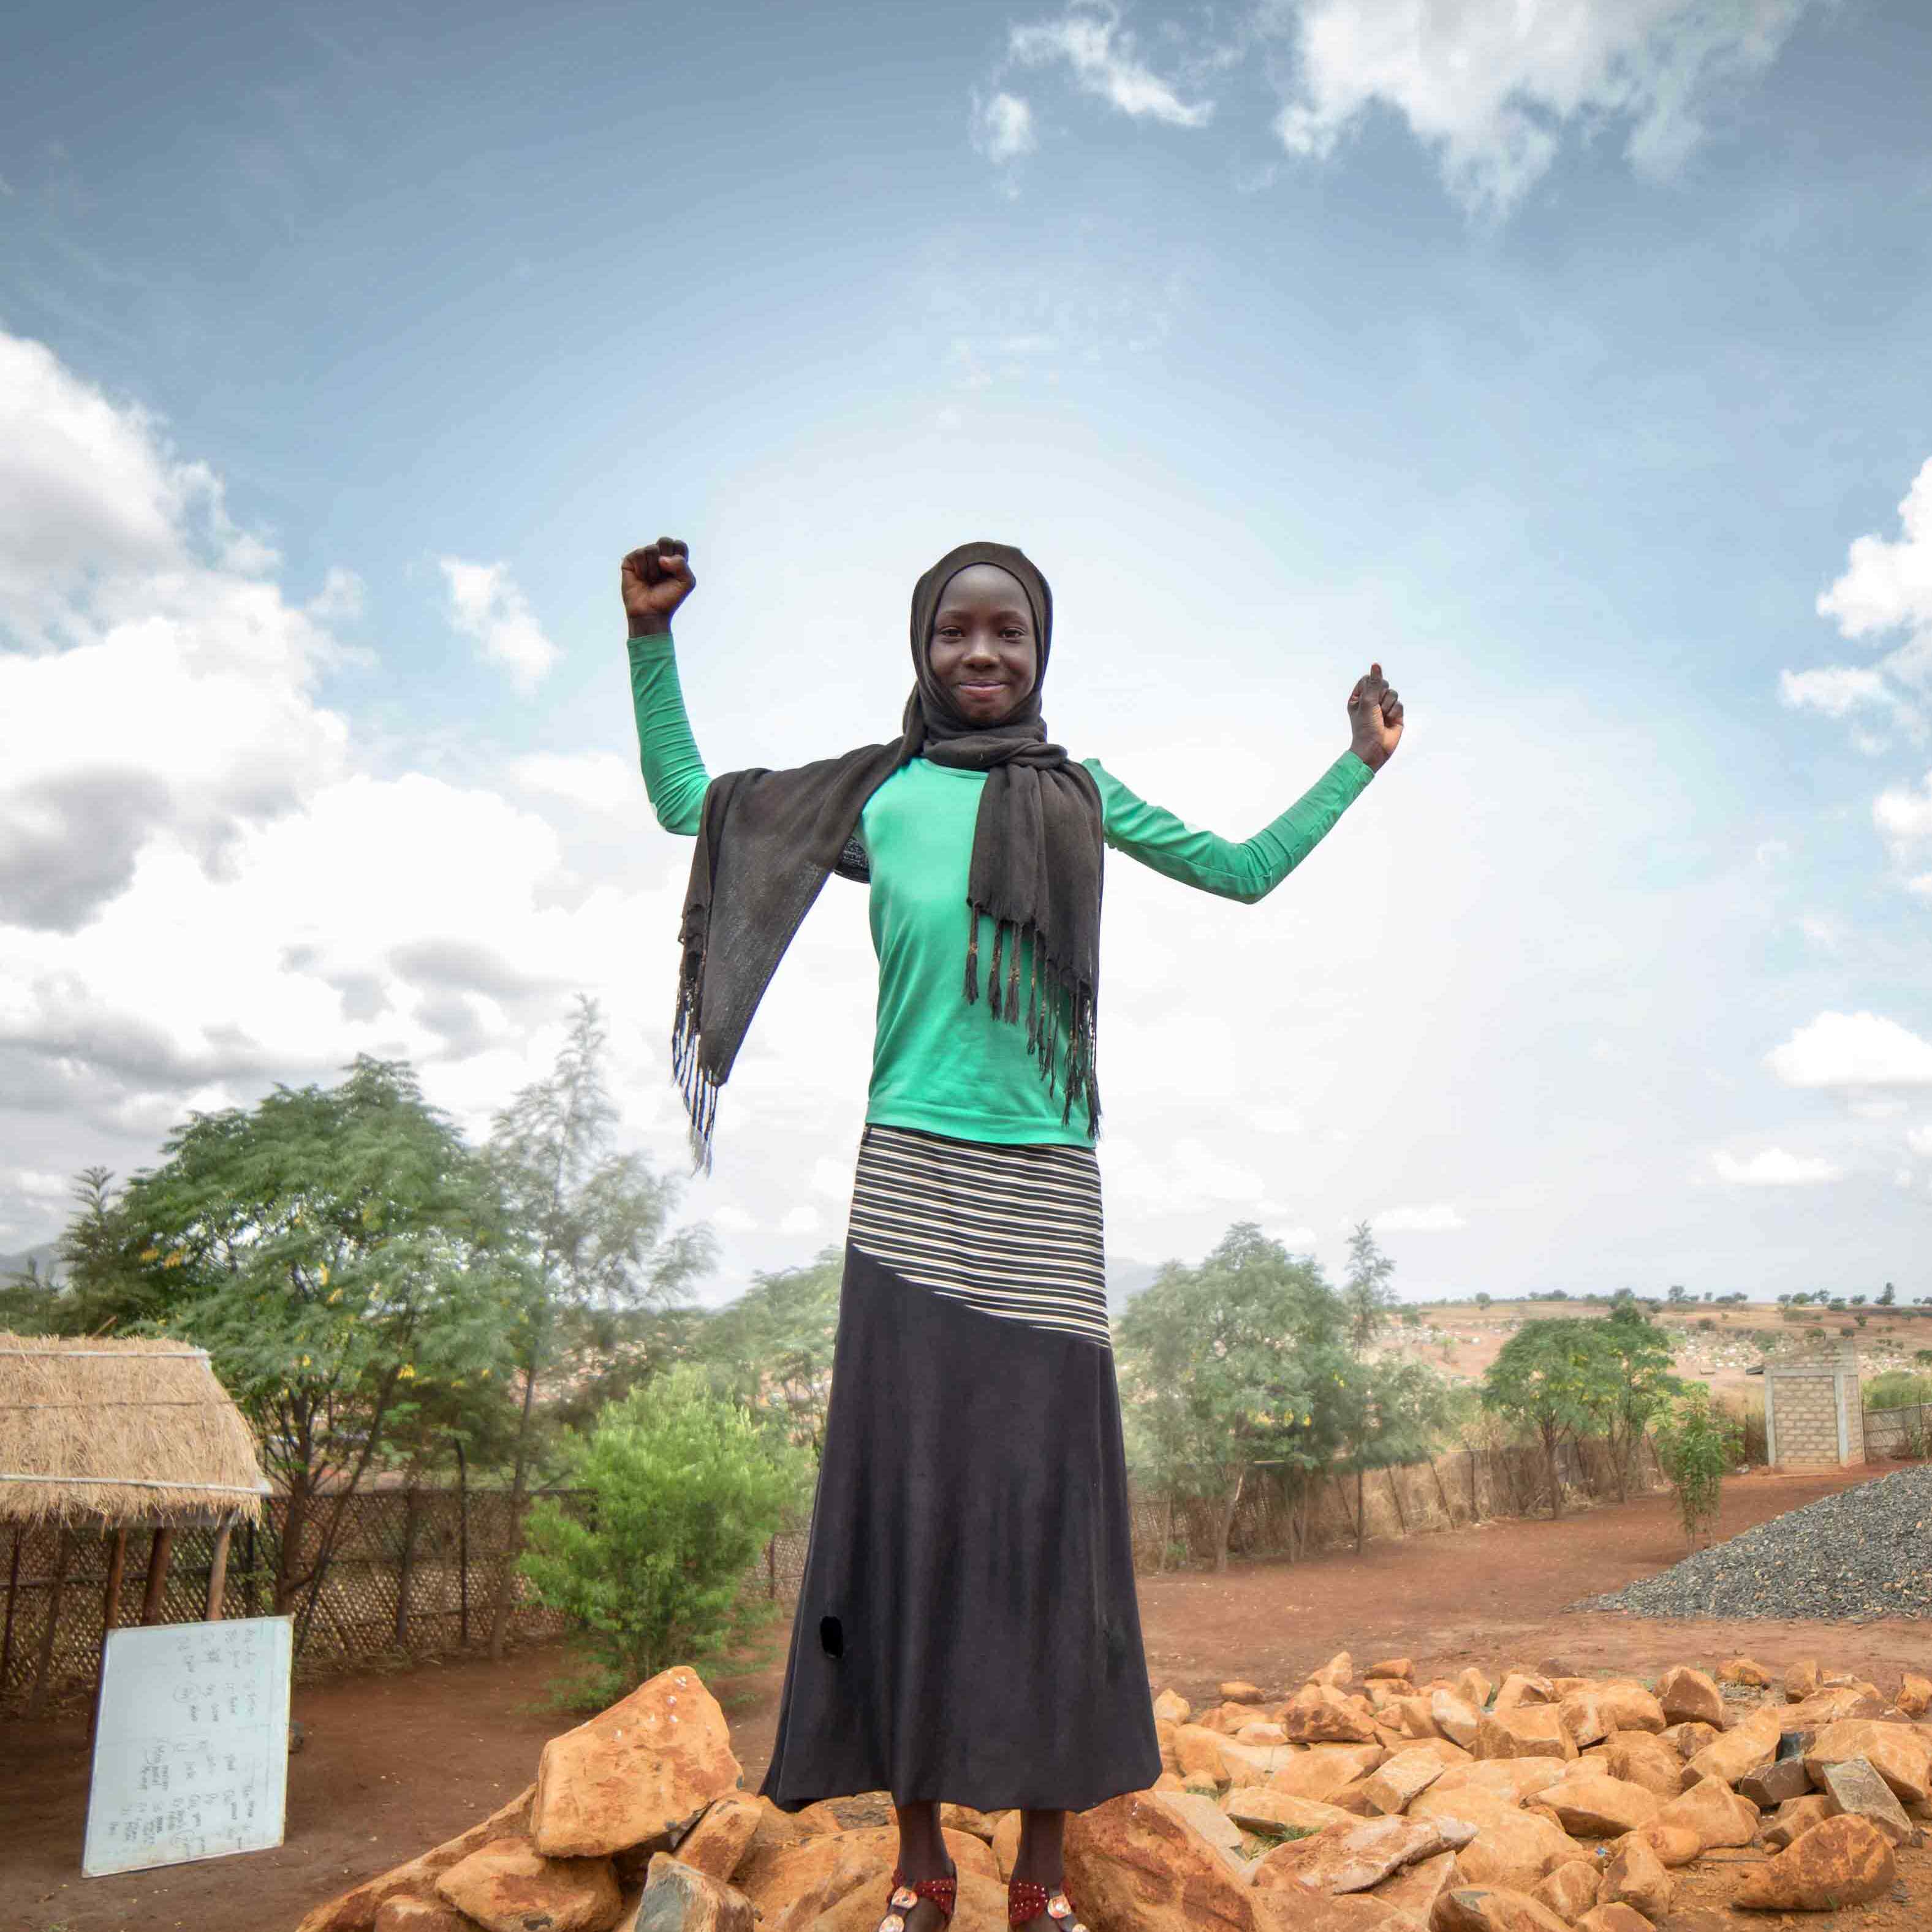 This girl from South Sudan participates in IRC Programs for girls and women in Bombassi Camp in Ethiopia.